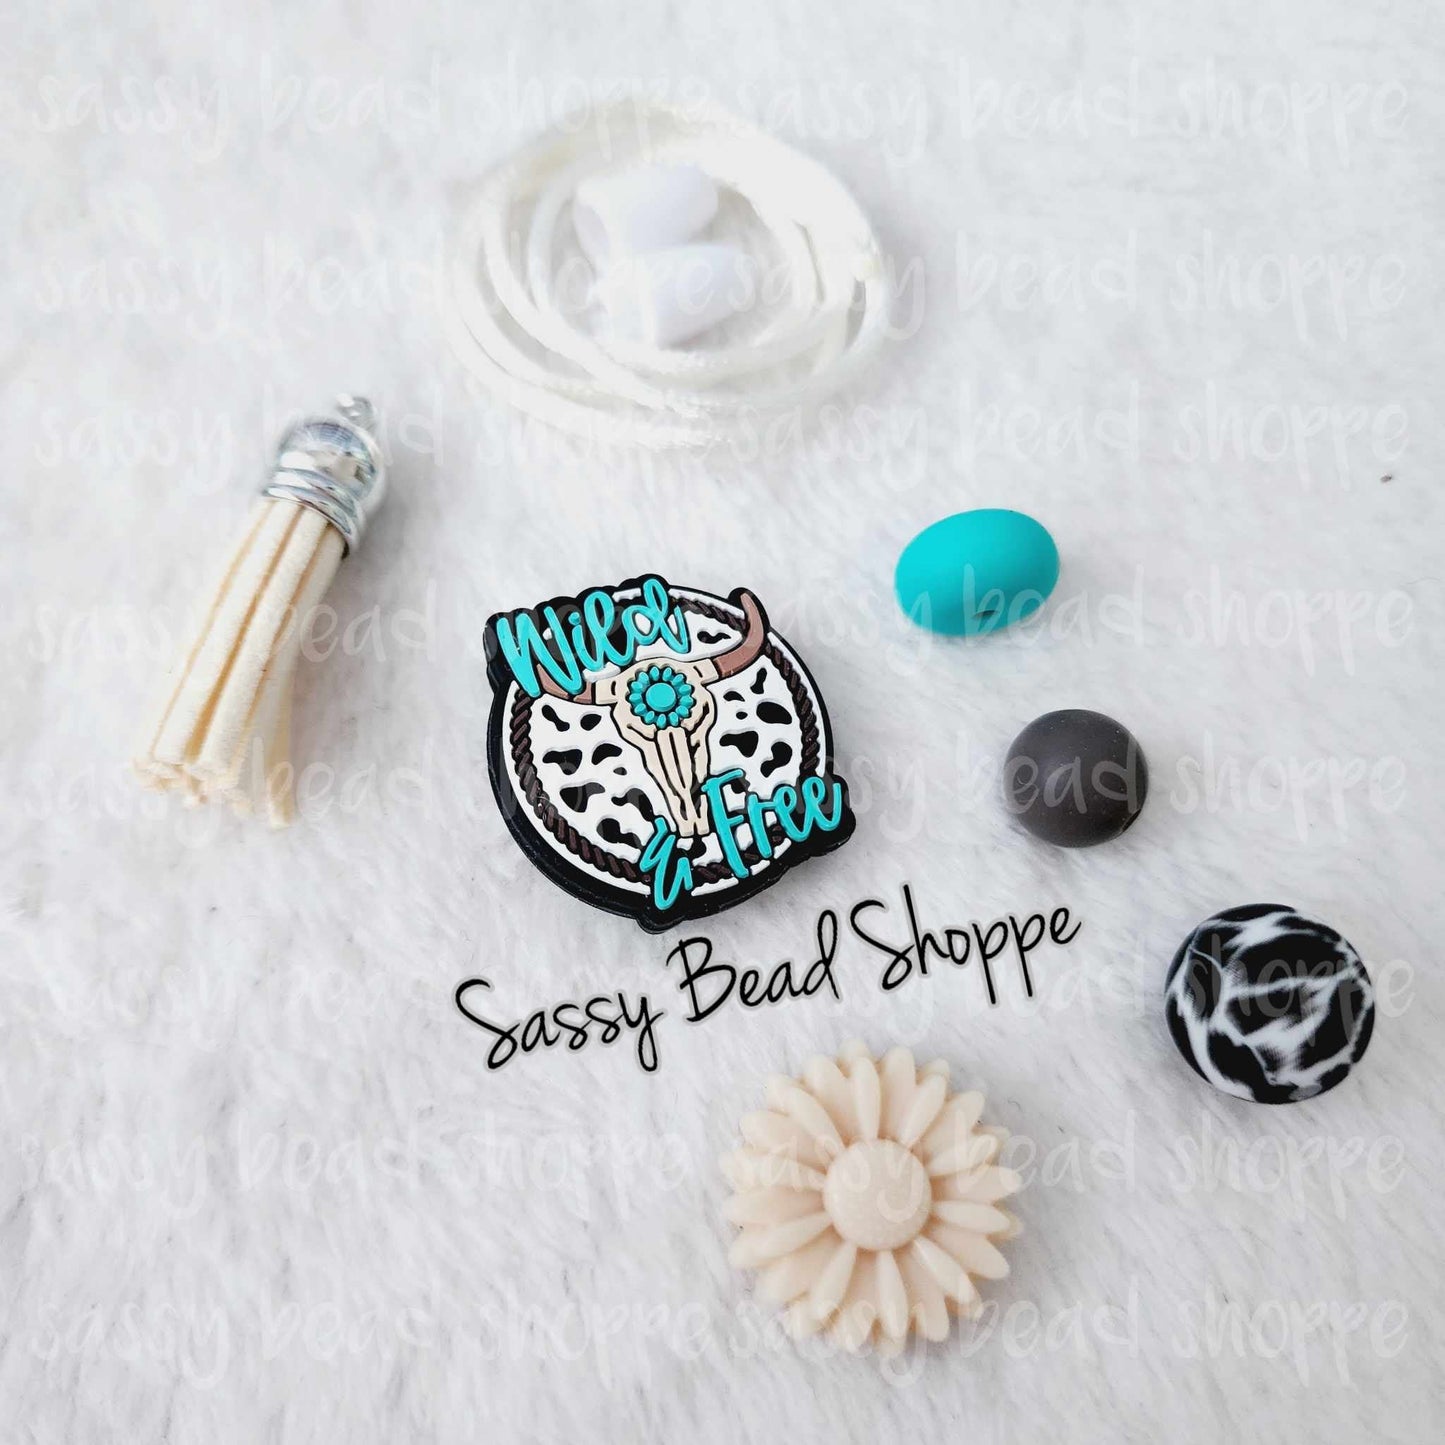 Sassy Bead Shoppe Wild Child Car Charm What you will receive in your kit